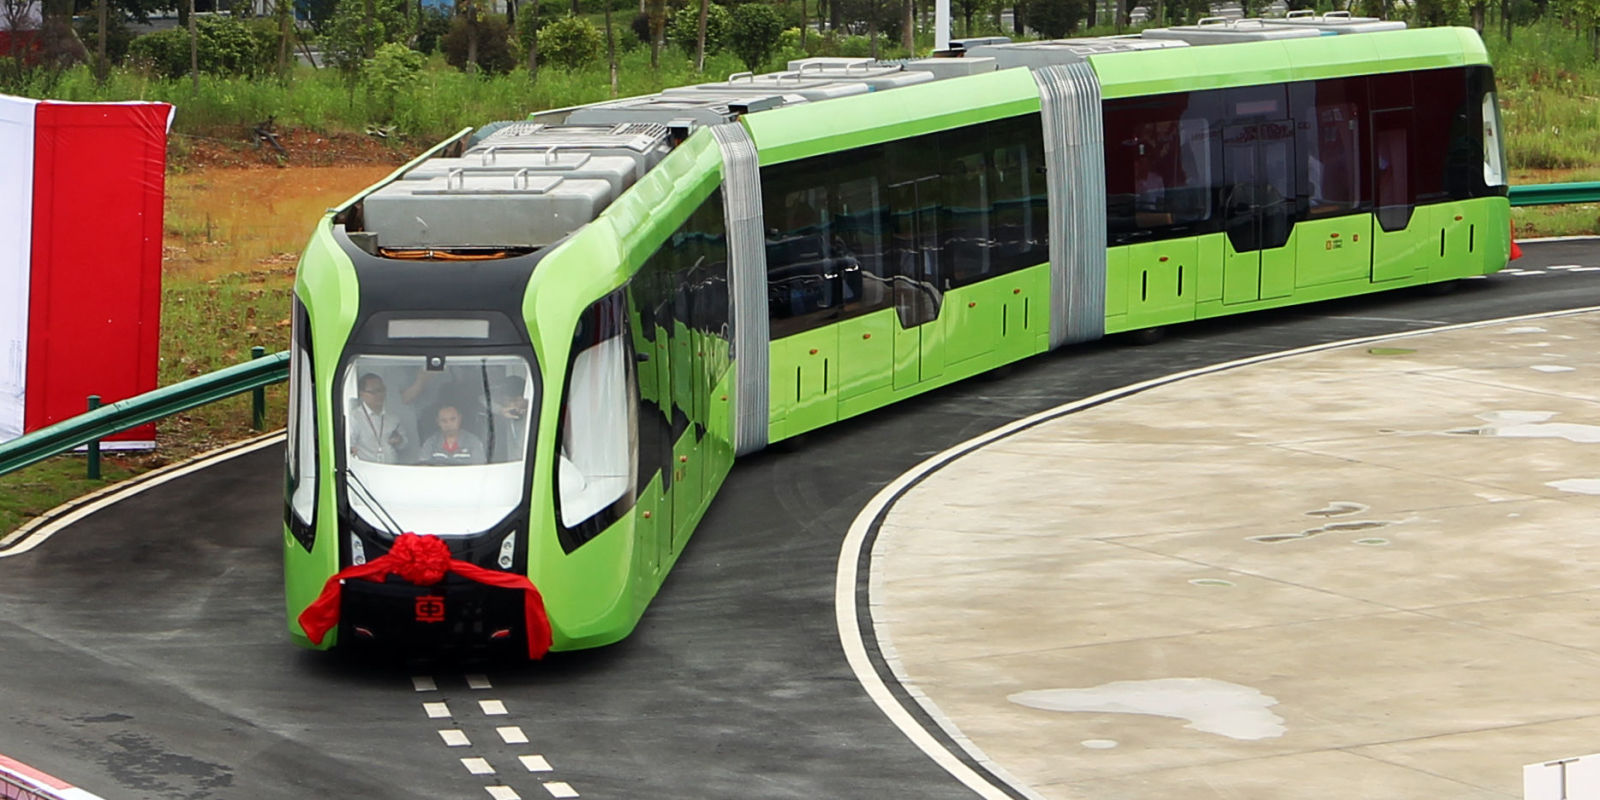 World's first railless train? China unveils hybrid selfdriving